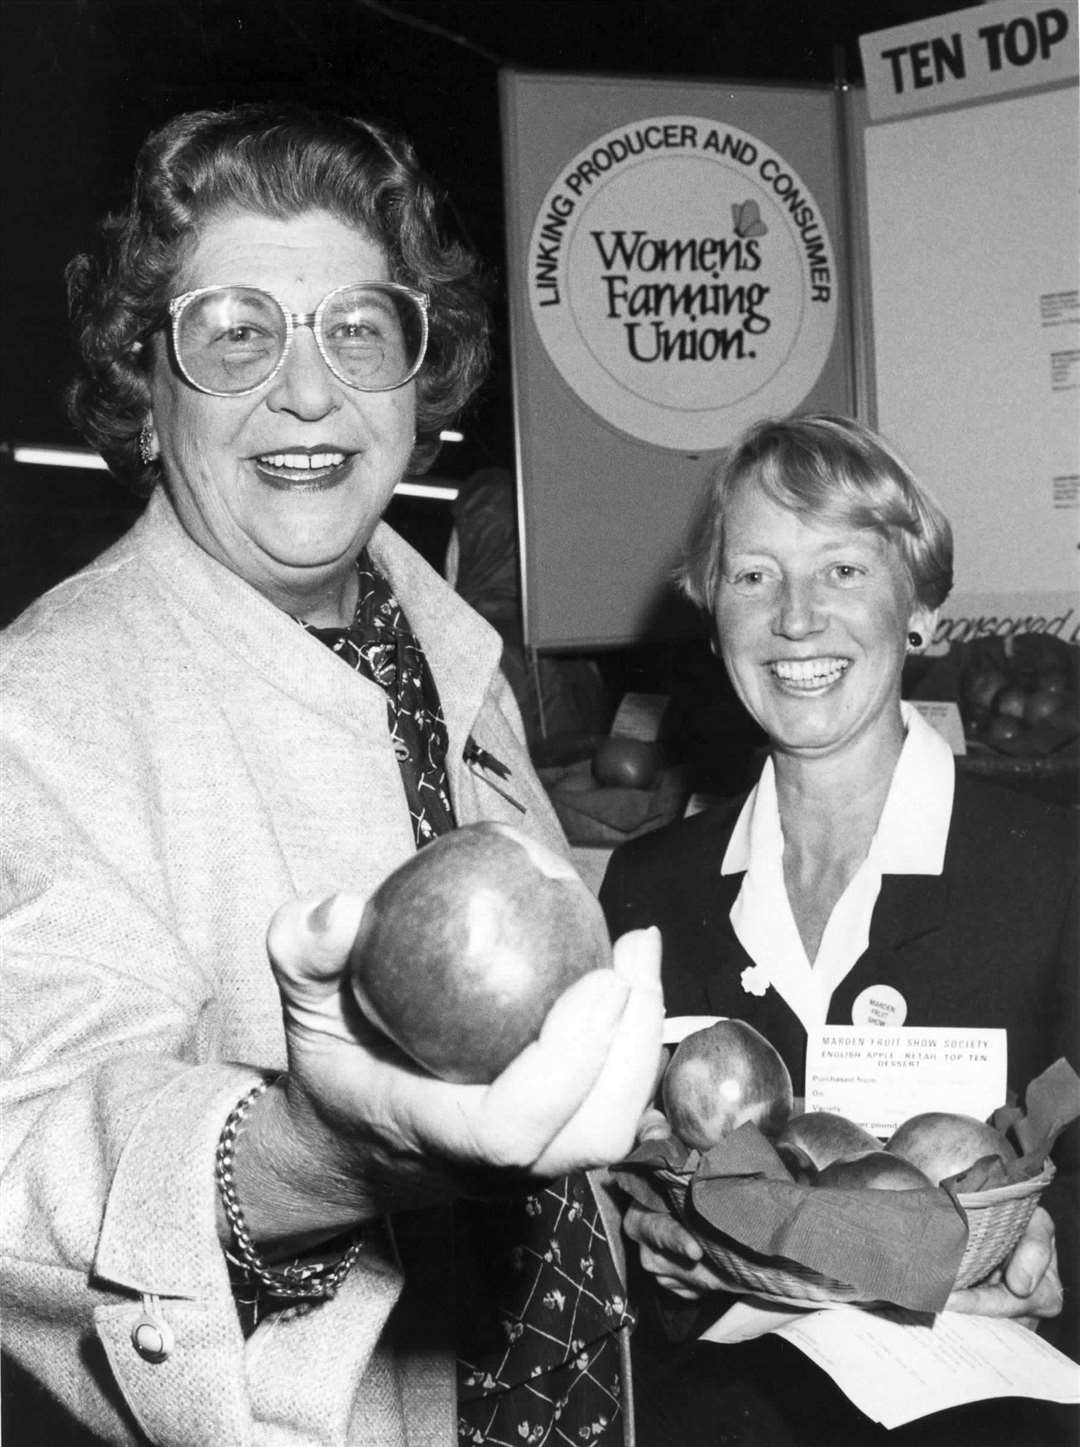 Baroness Trumpington at a stall for the Women's Farming Union at a show in Marden in 1988